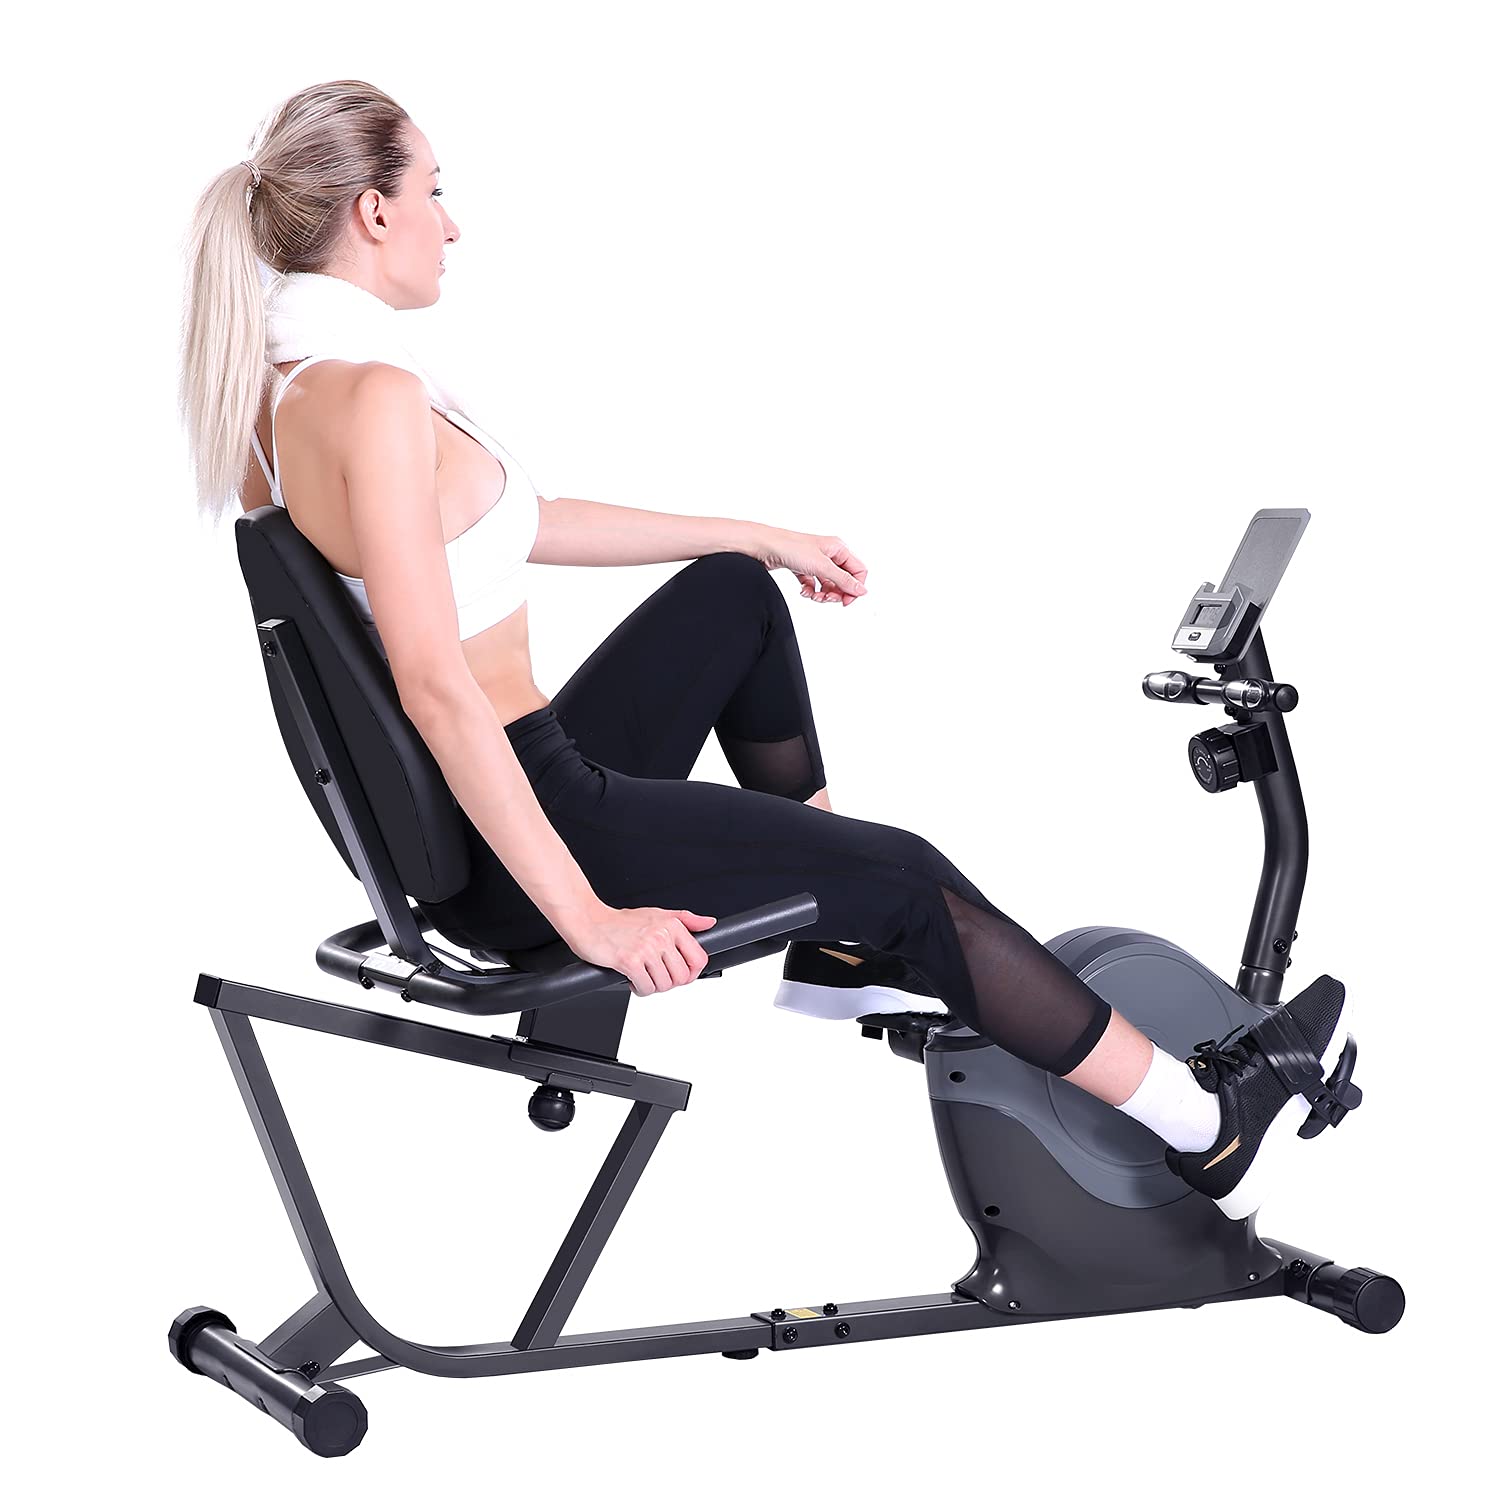 Load image into Gallery viewer, Magnetic Recumbent Exercise Bike for Adults Seniors -Pulse Rate Monitoring, 300 lb Capacity, phone holder and Quick Adjustable Seat- Indoor Magnetic Cycling Fitness Equipment for Home Workout
